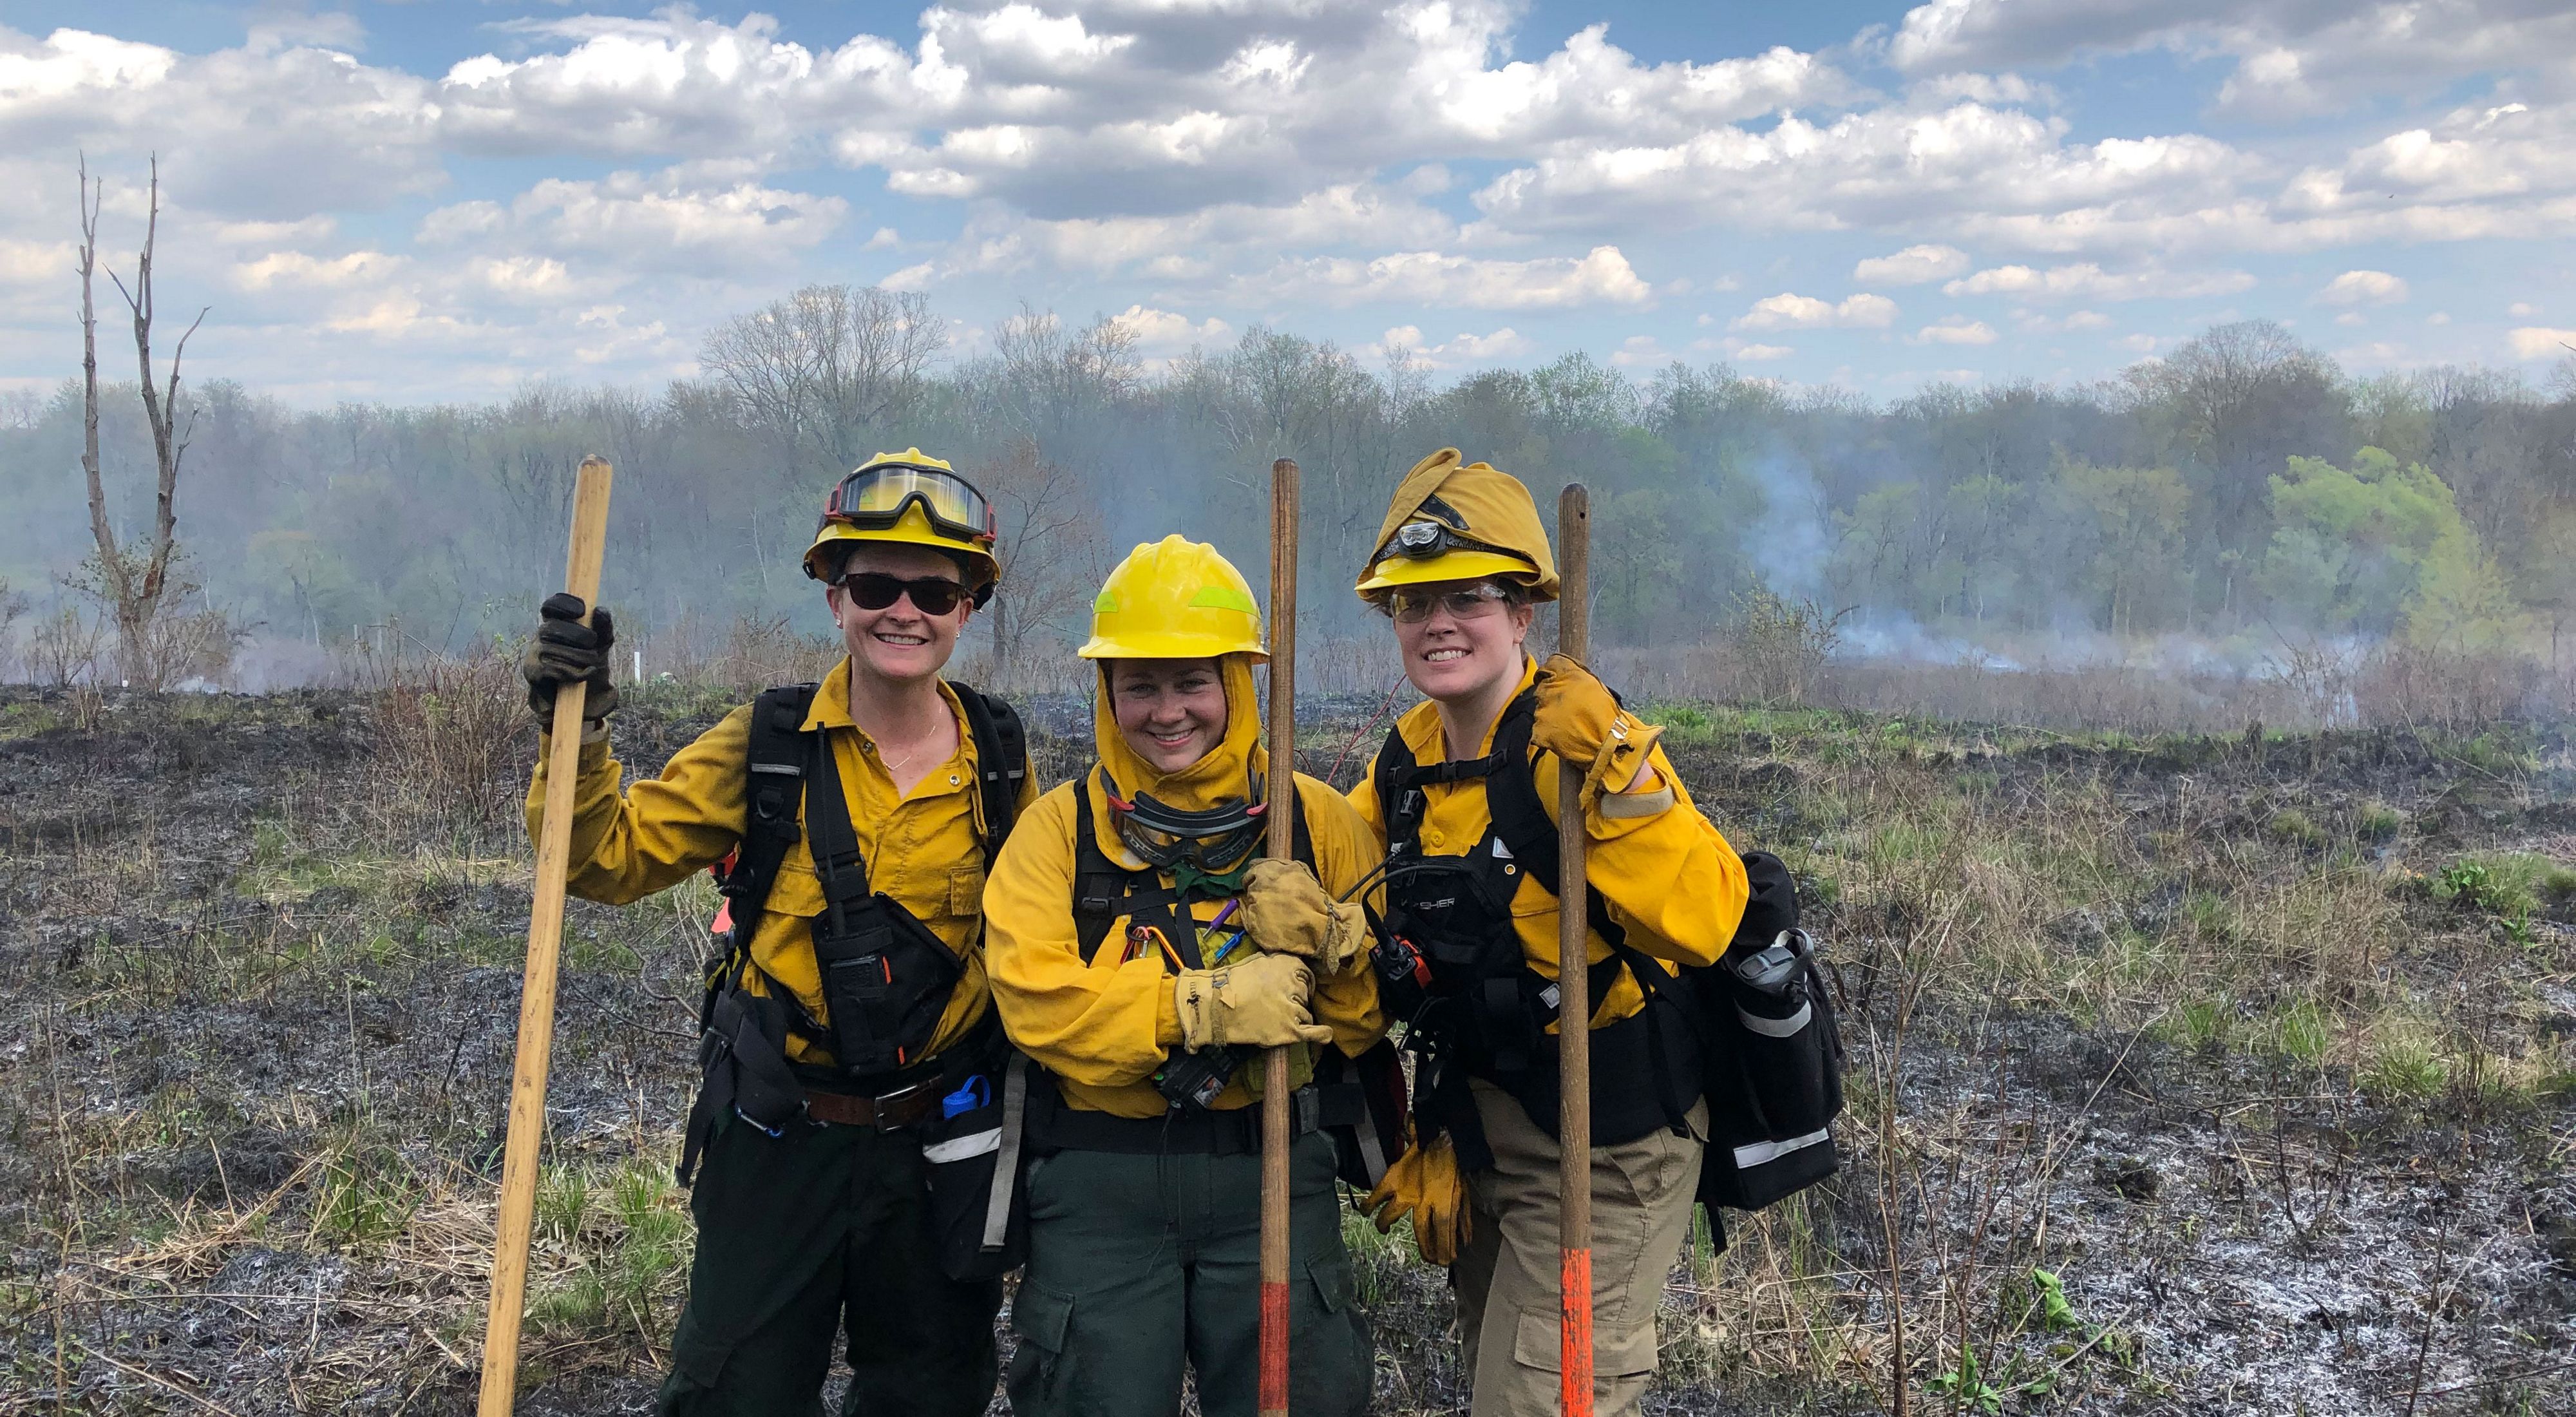 Three women holding shovels and wearing hard hats and burn gear at a prescribed burn in a field.